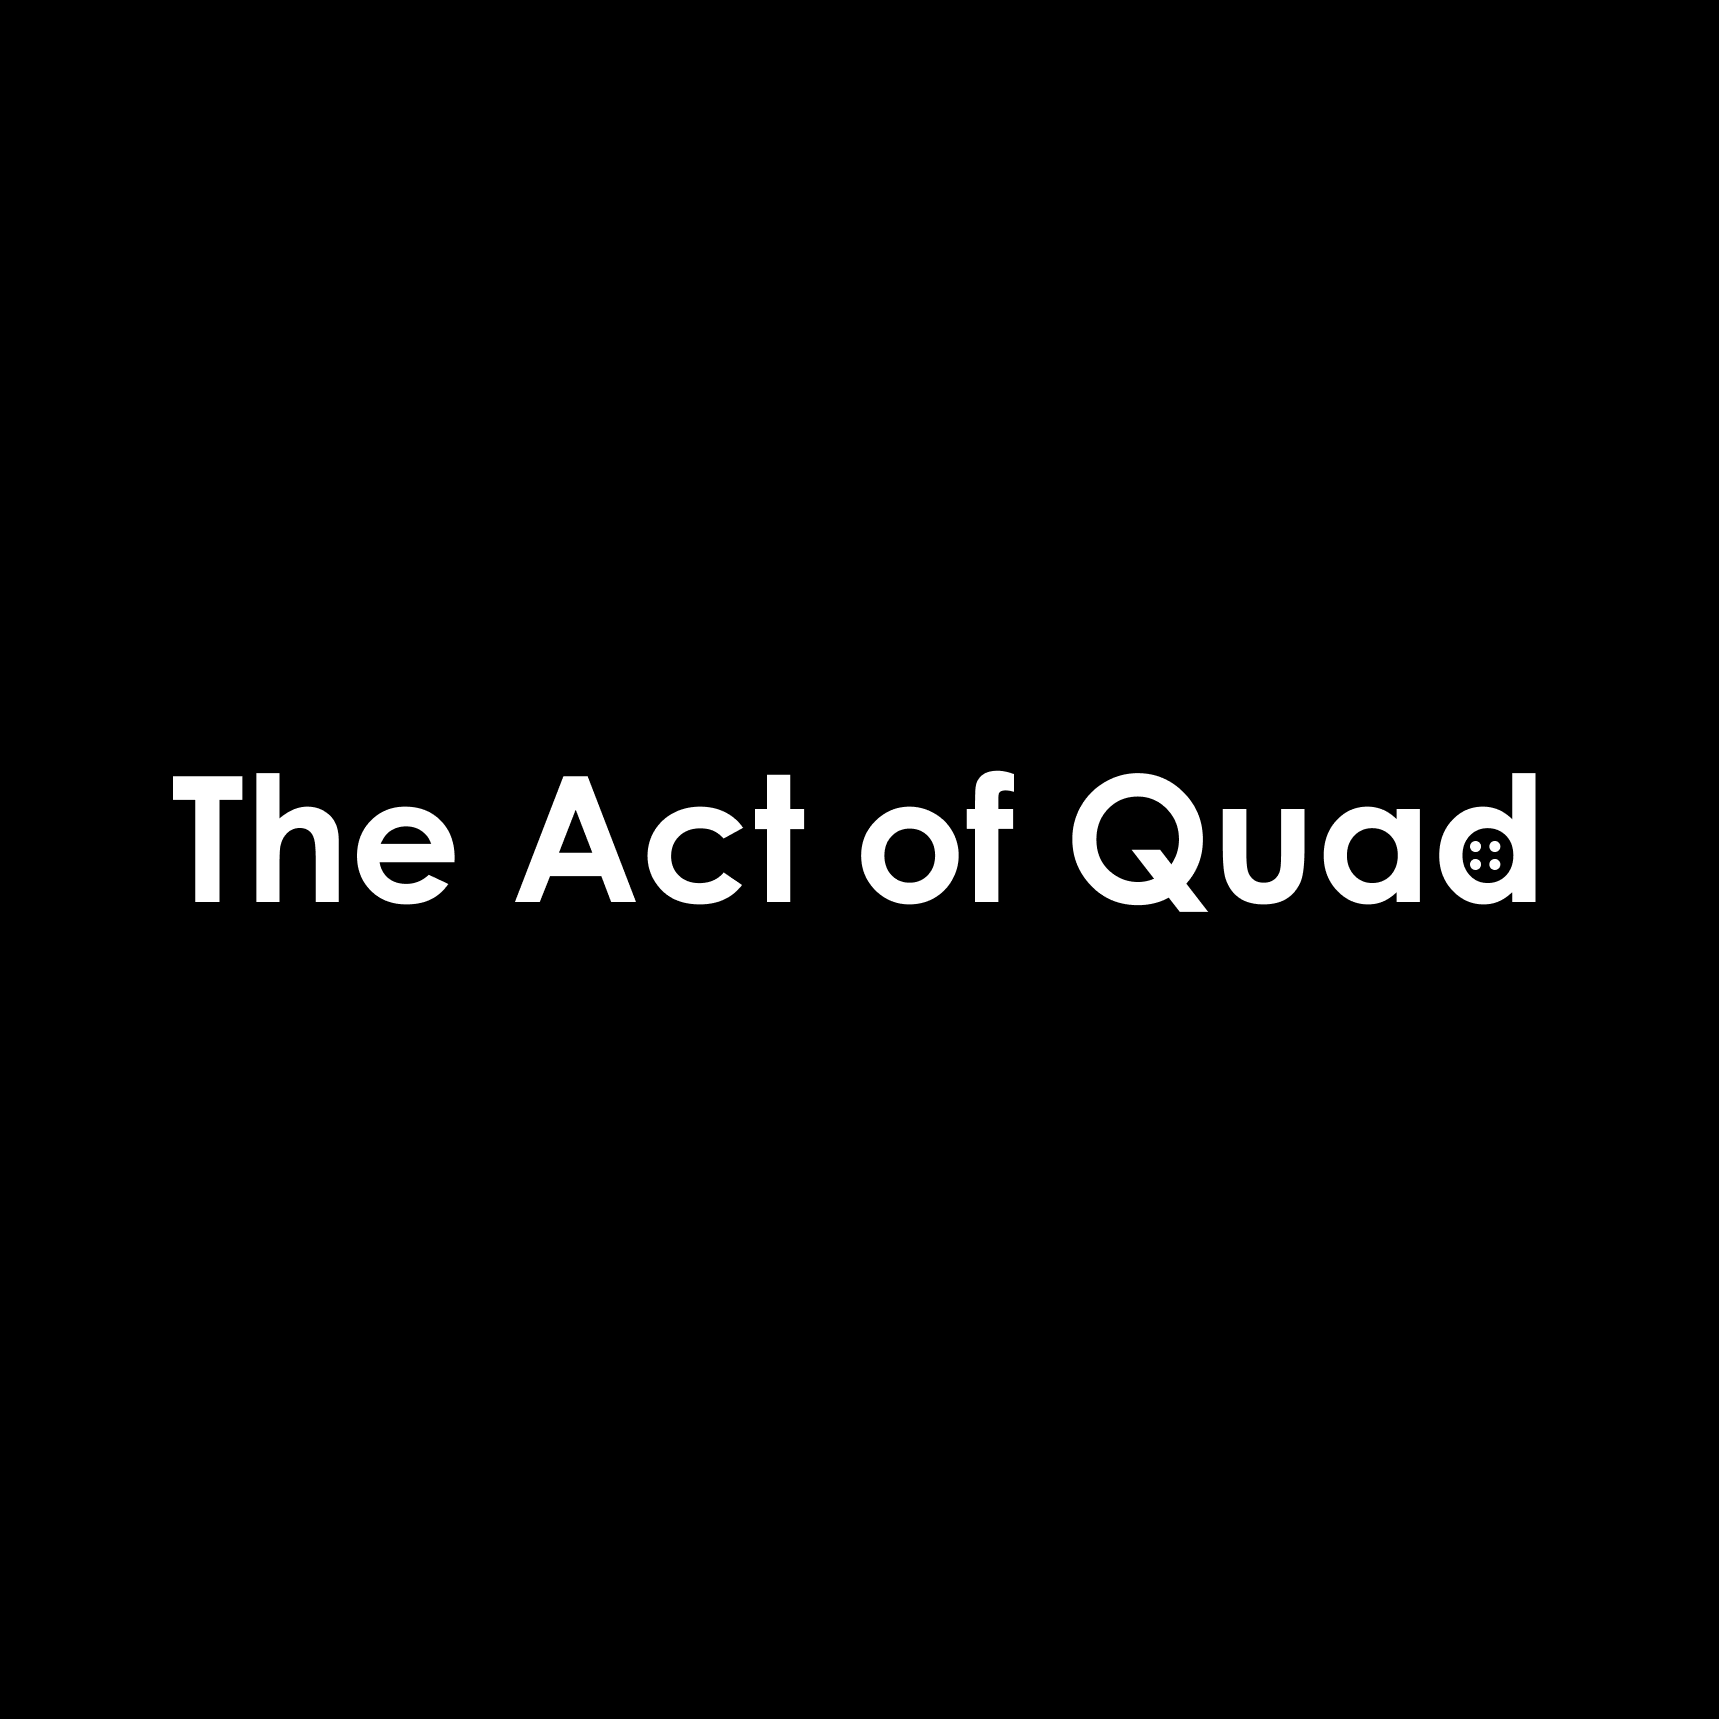 The Act of Quad